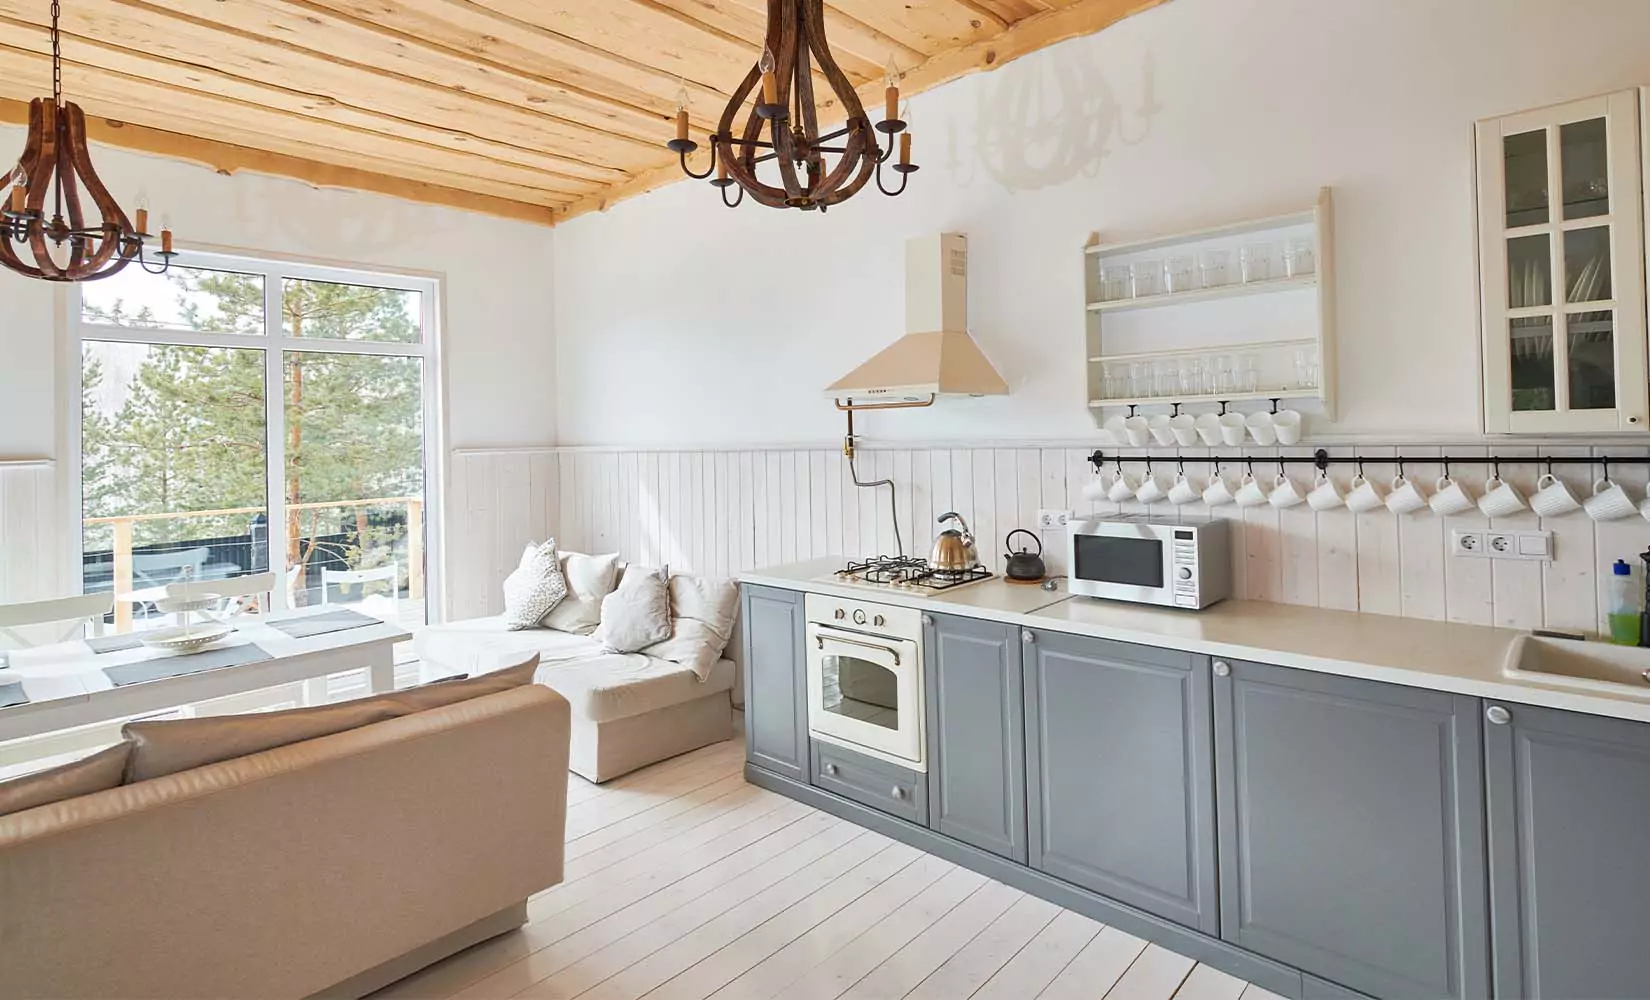 Gray farmhouse kitchen with reclaimed wood ceiling.